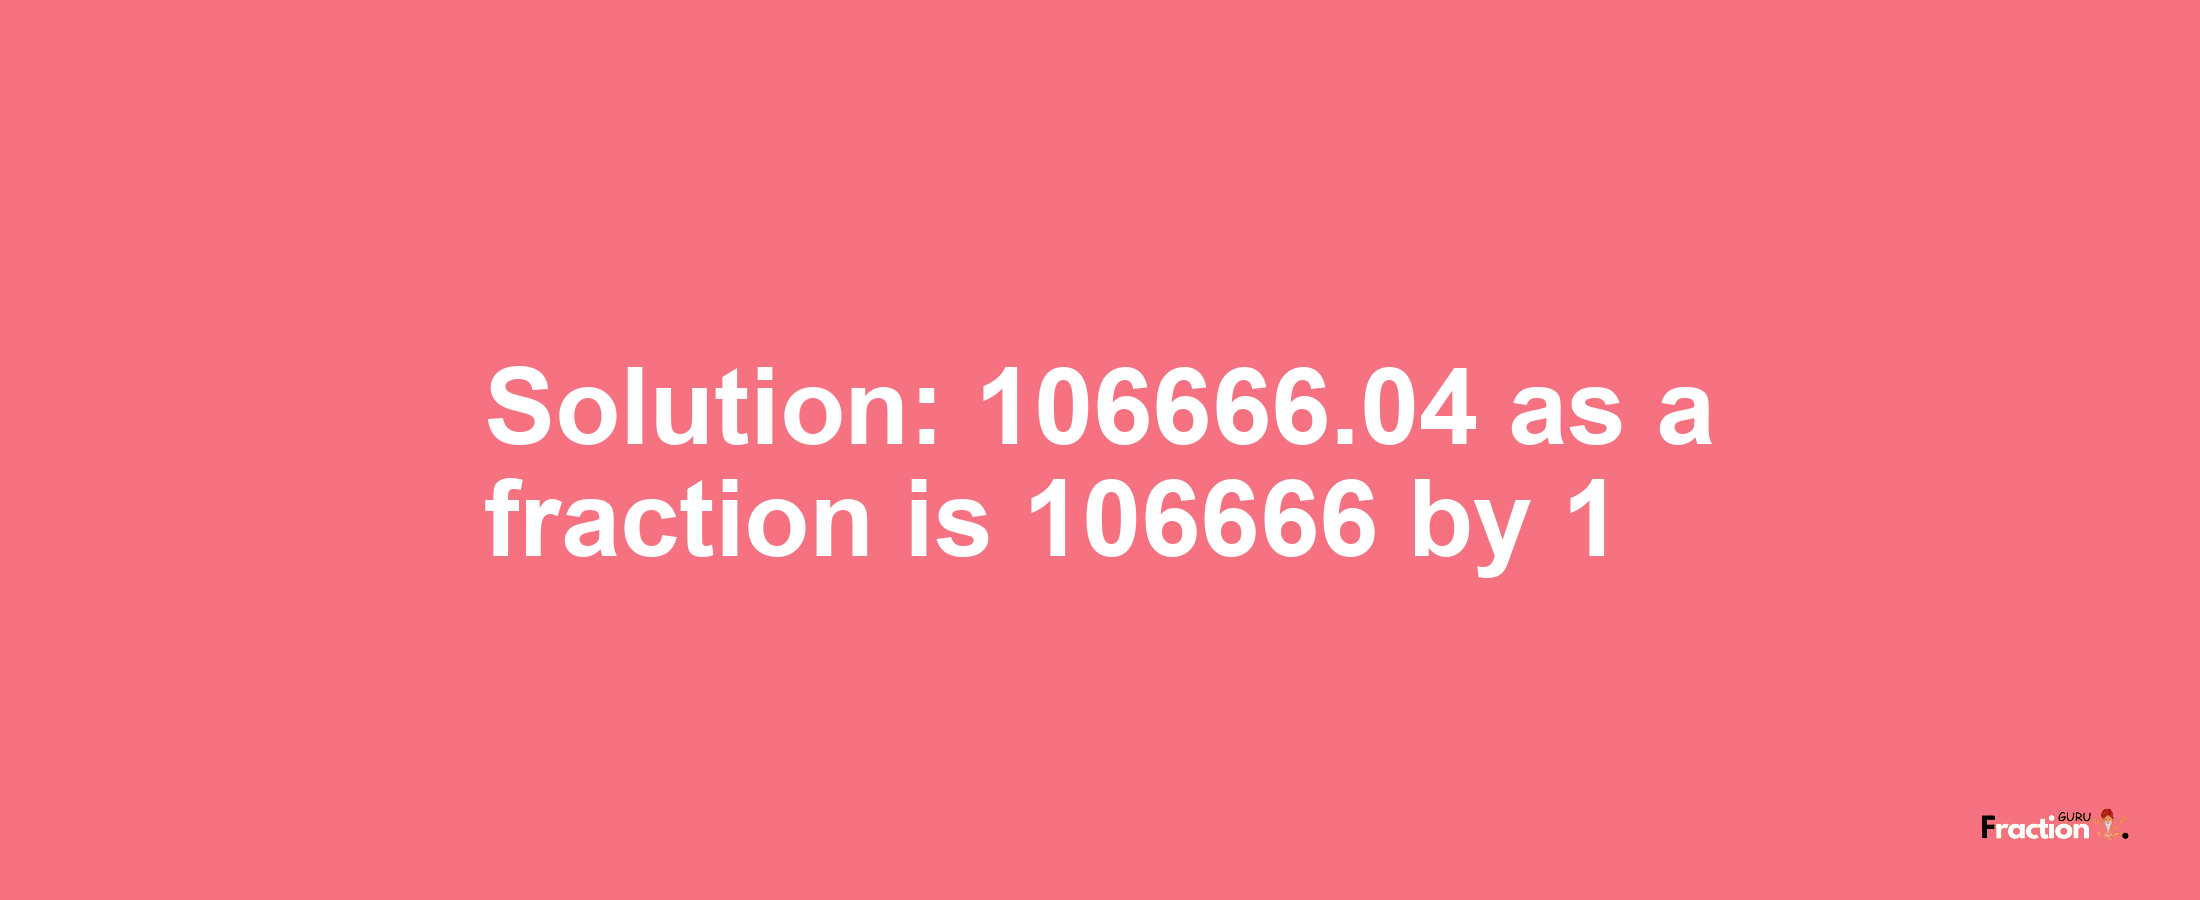 Solution:106666.04 as a fraction is 106666/1